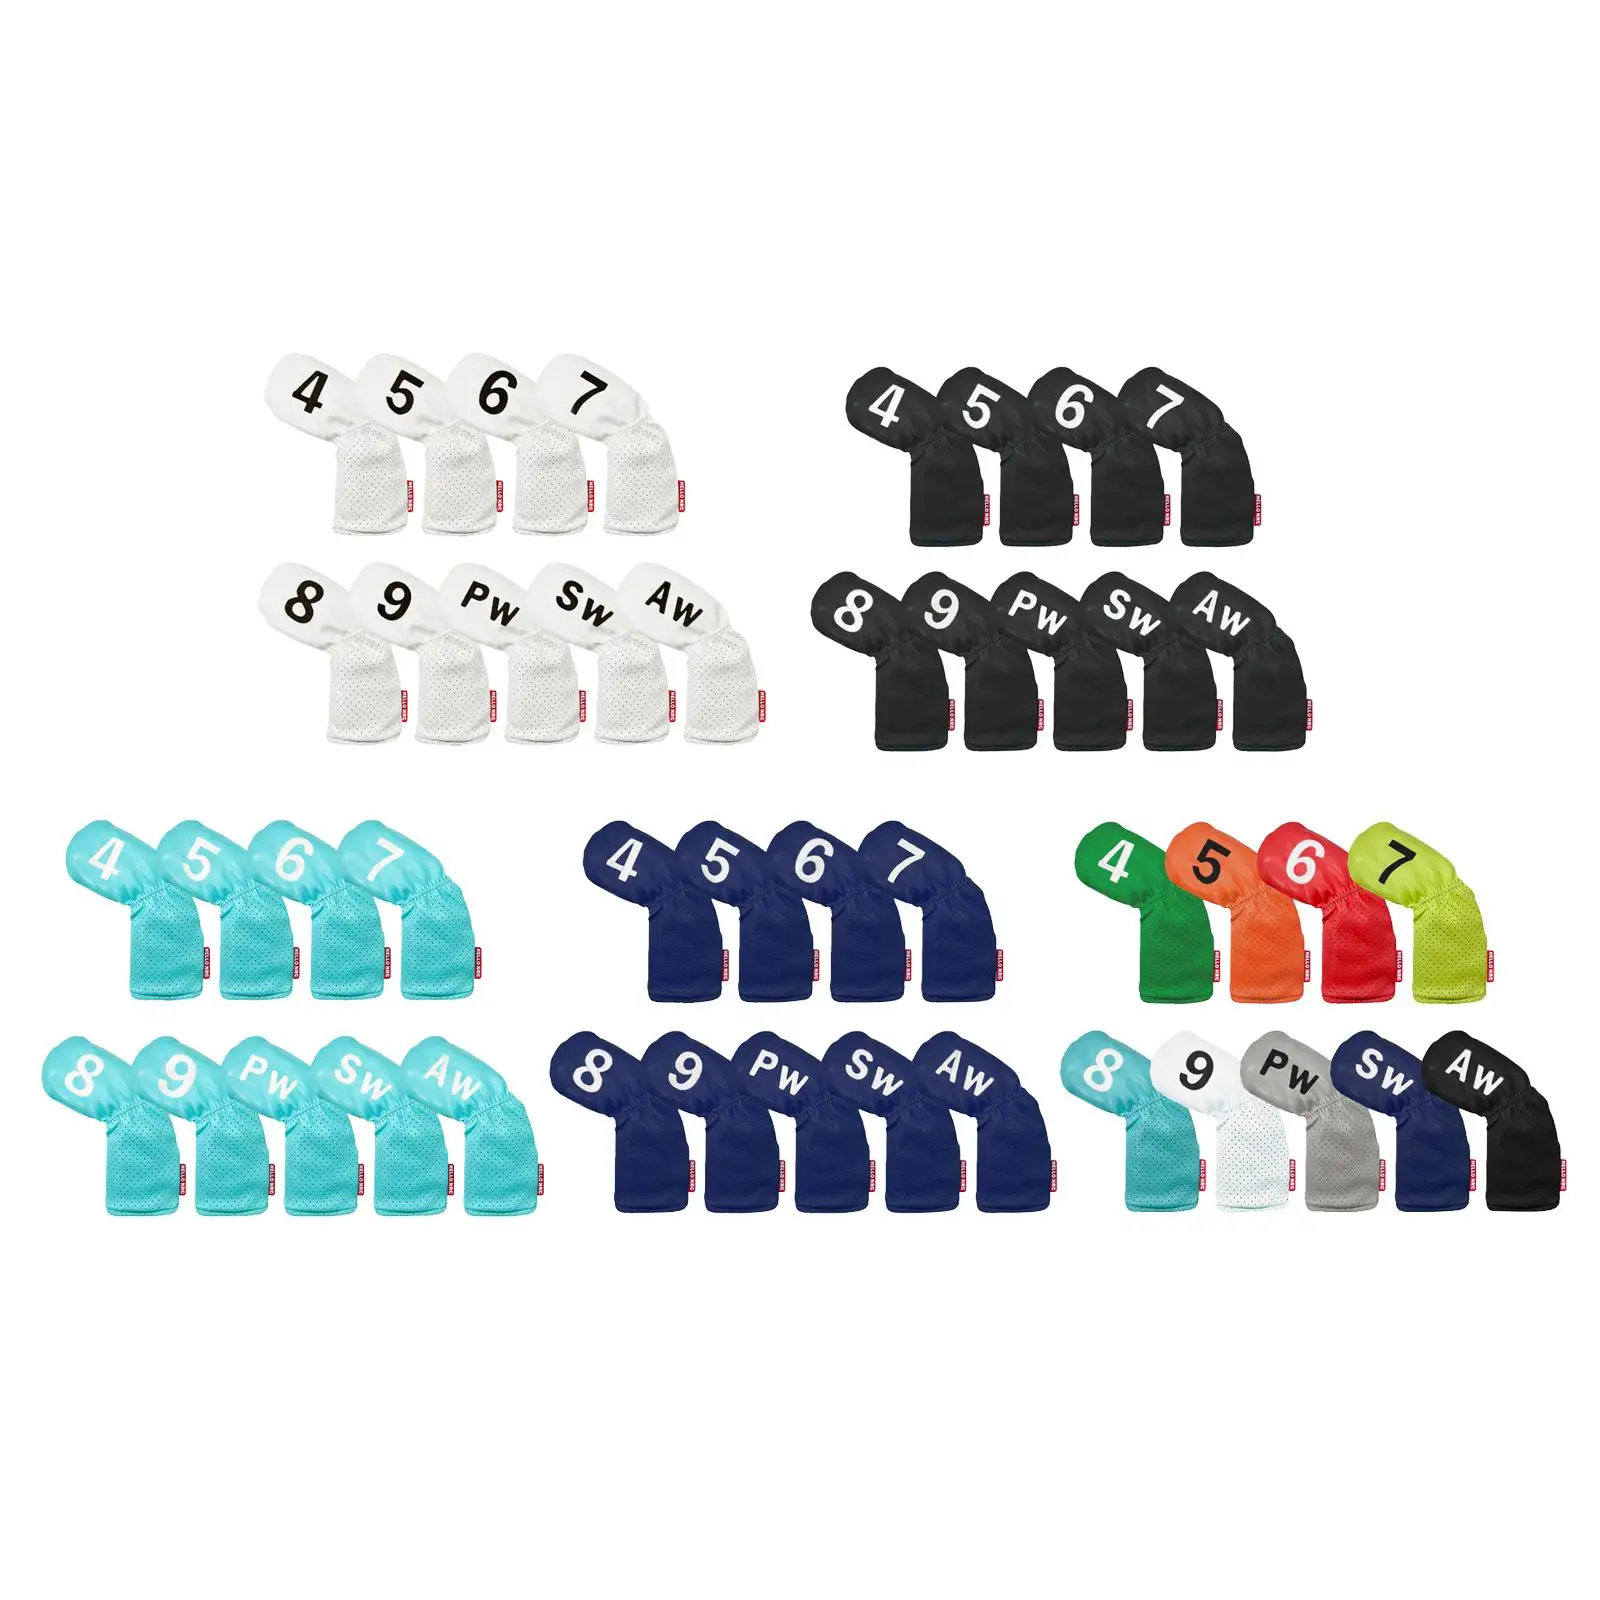 

9x Golf Iron Headcover Set PU Long Neck with Big Number Fits All Brands